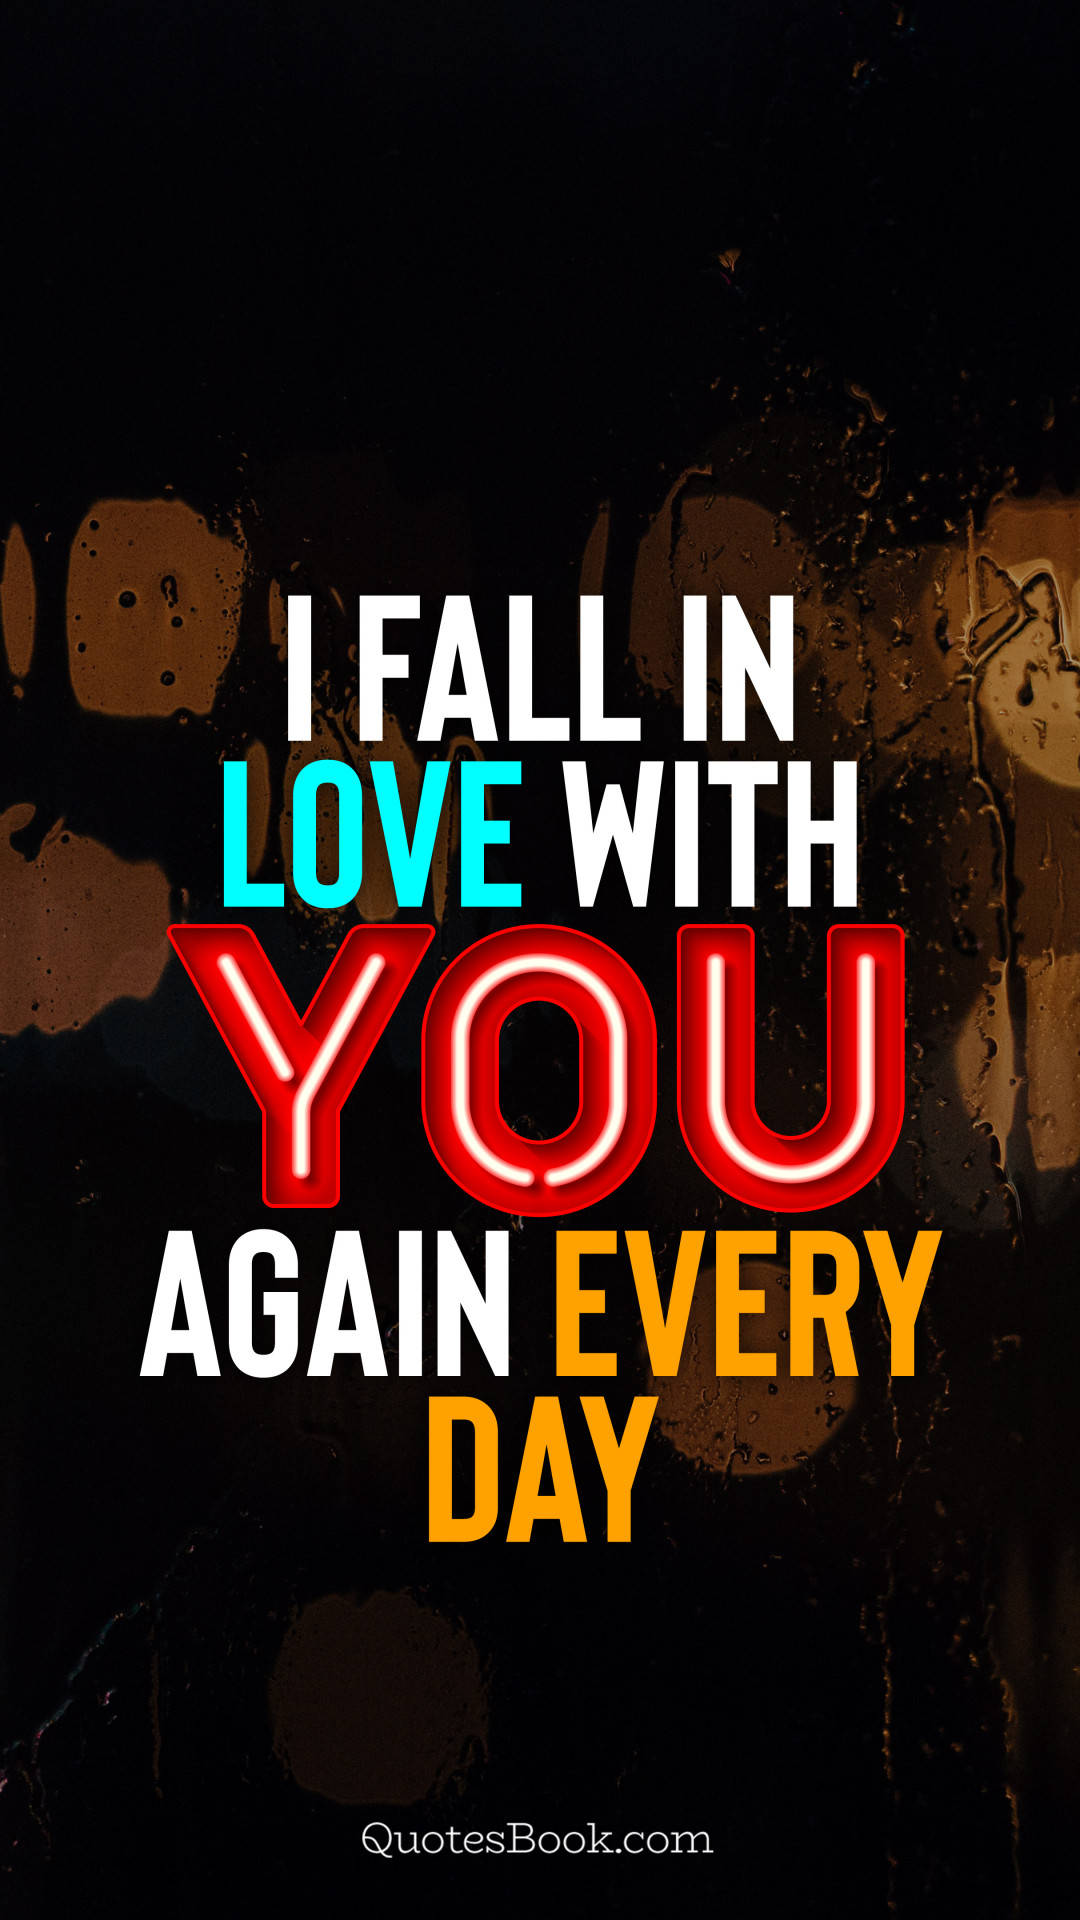 I fall in love with you again every day. - Quote by QuotesBook - QuotesBook